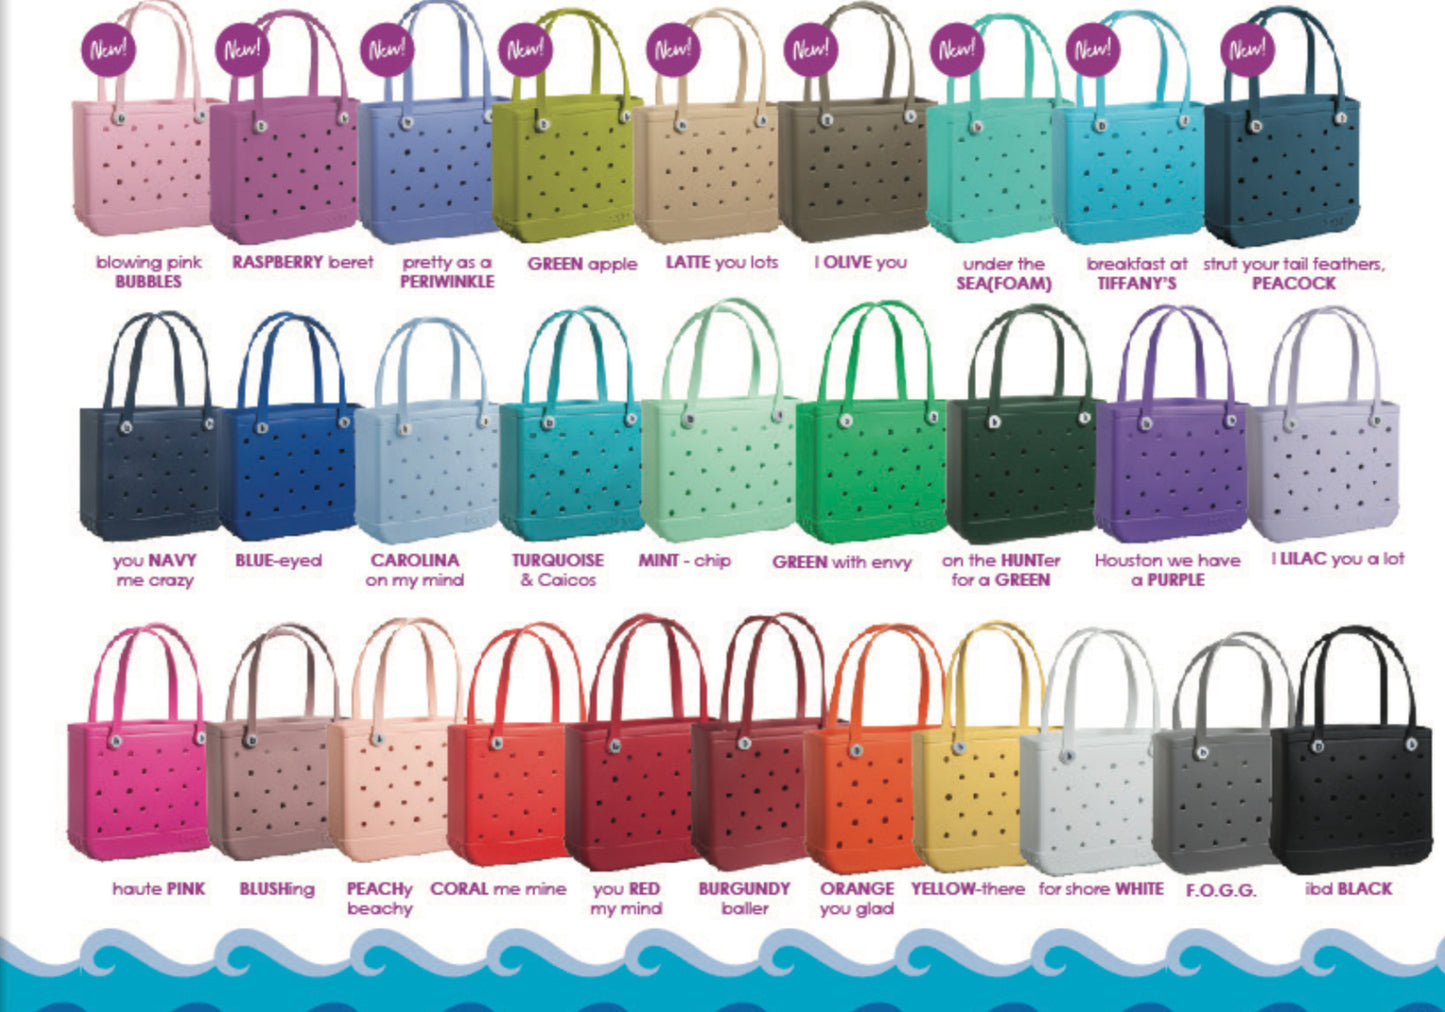 Baby Bogg Bag - More Colors